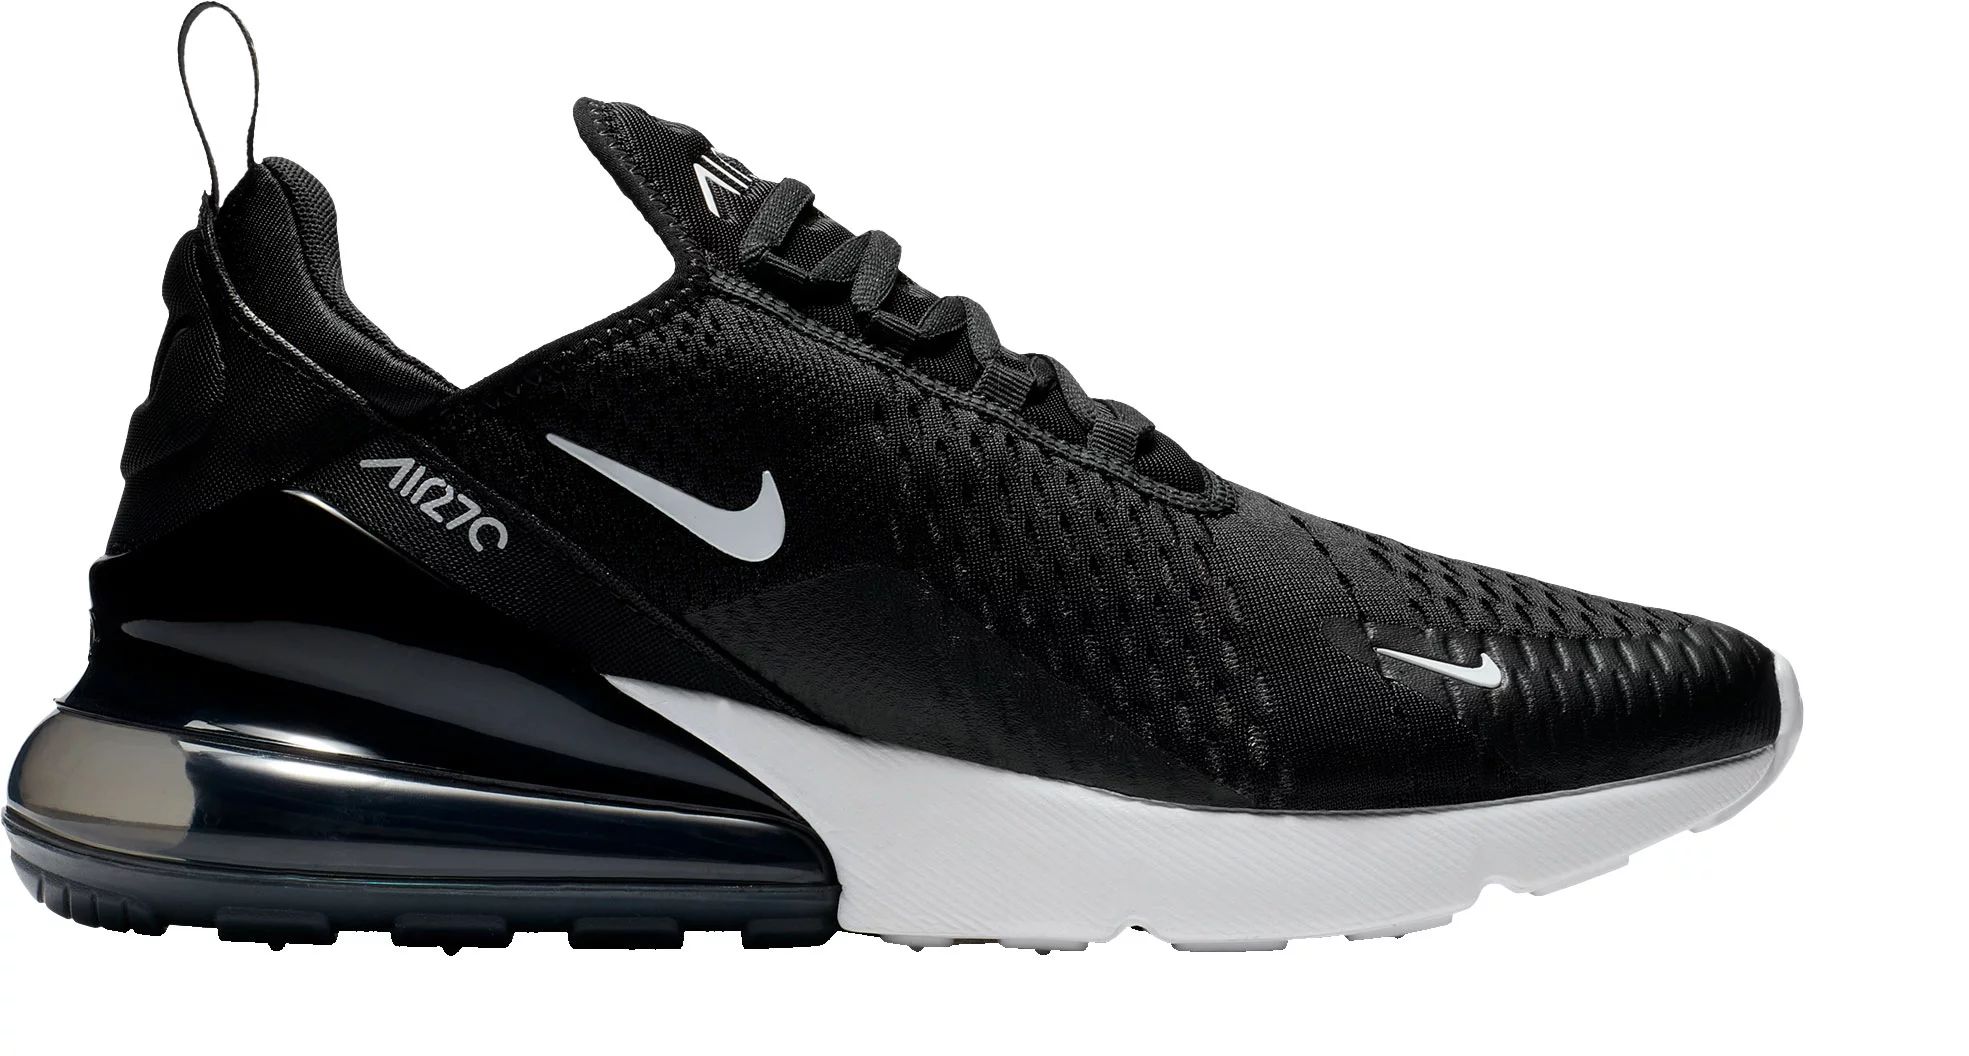 Nike Women's Air Max 270 Shoes, Size 11, Black/White | Dick's Sporting Goods